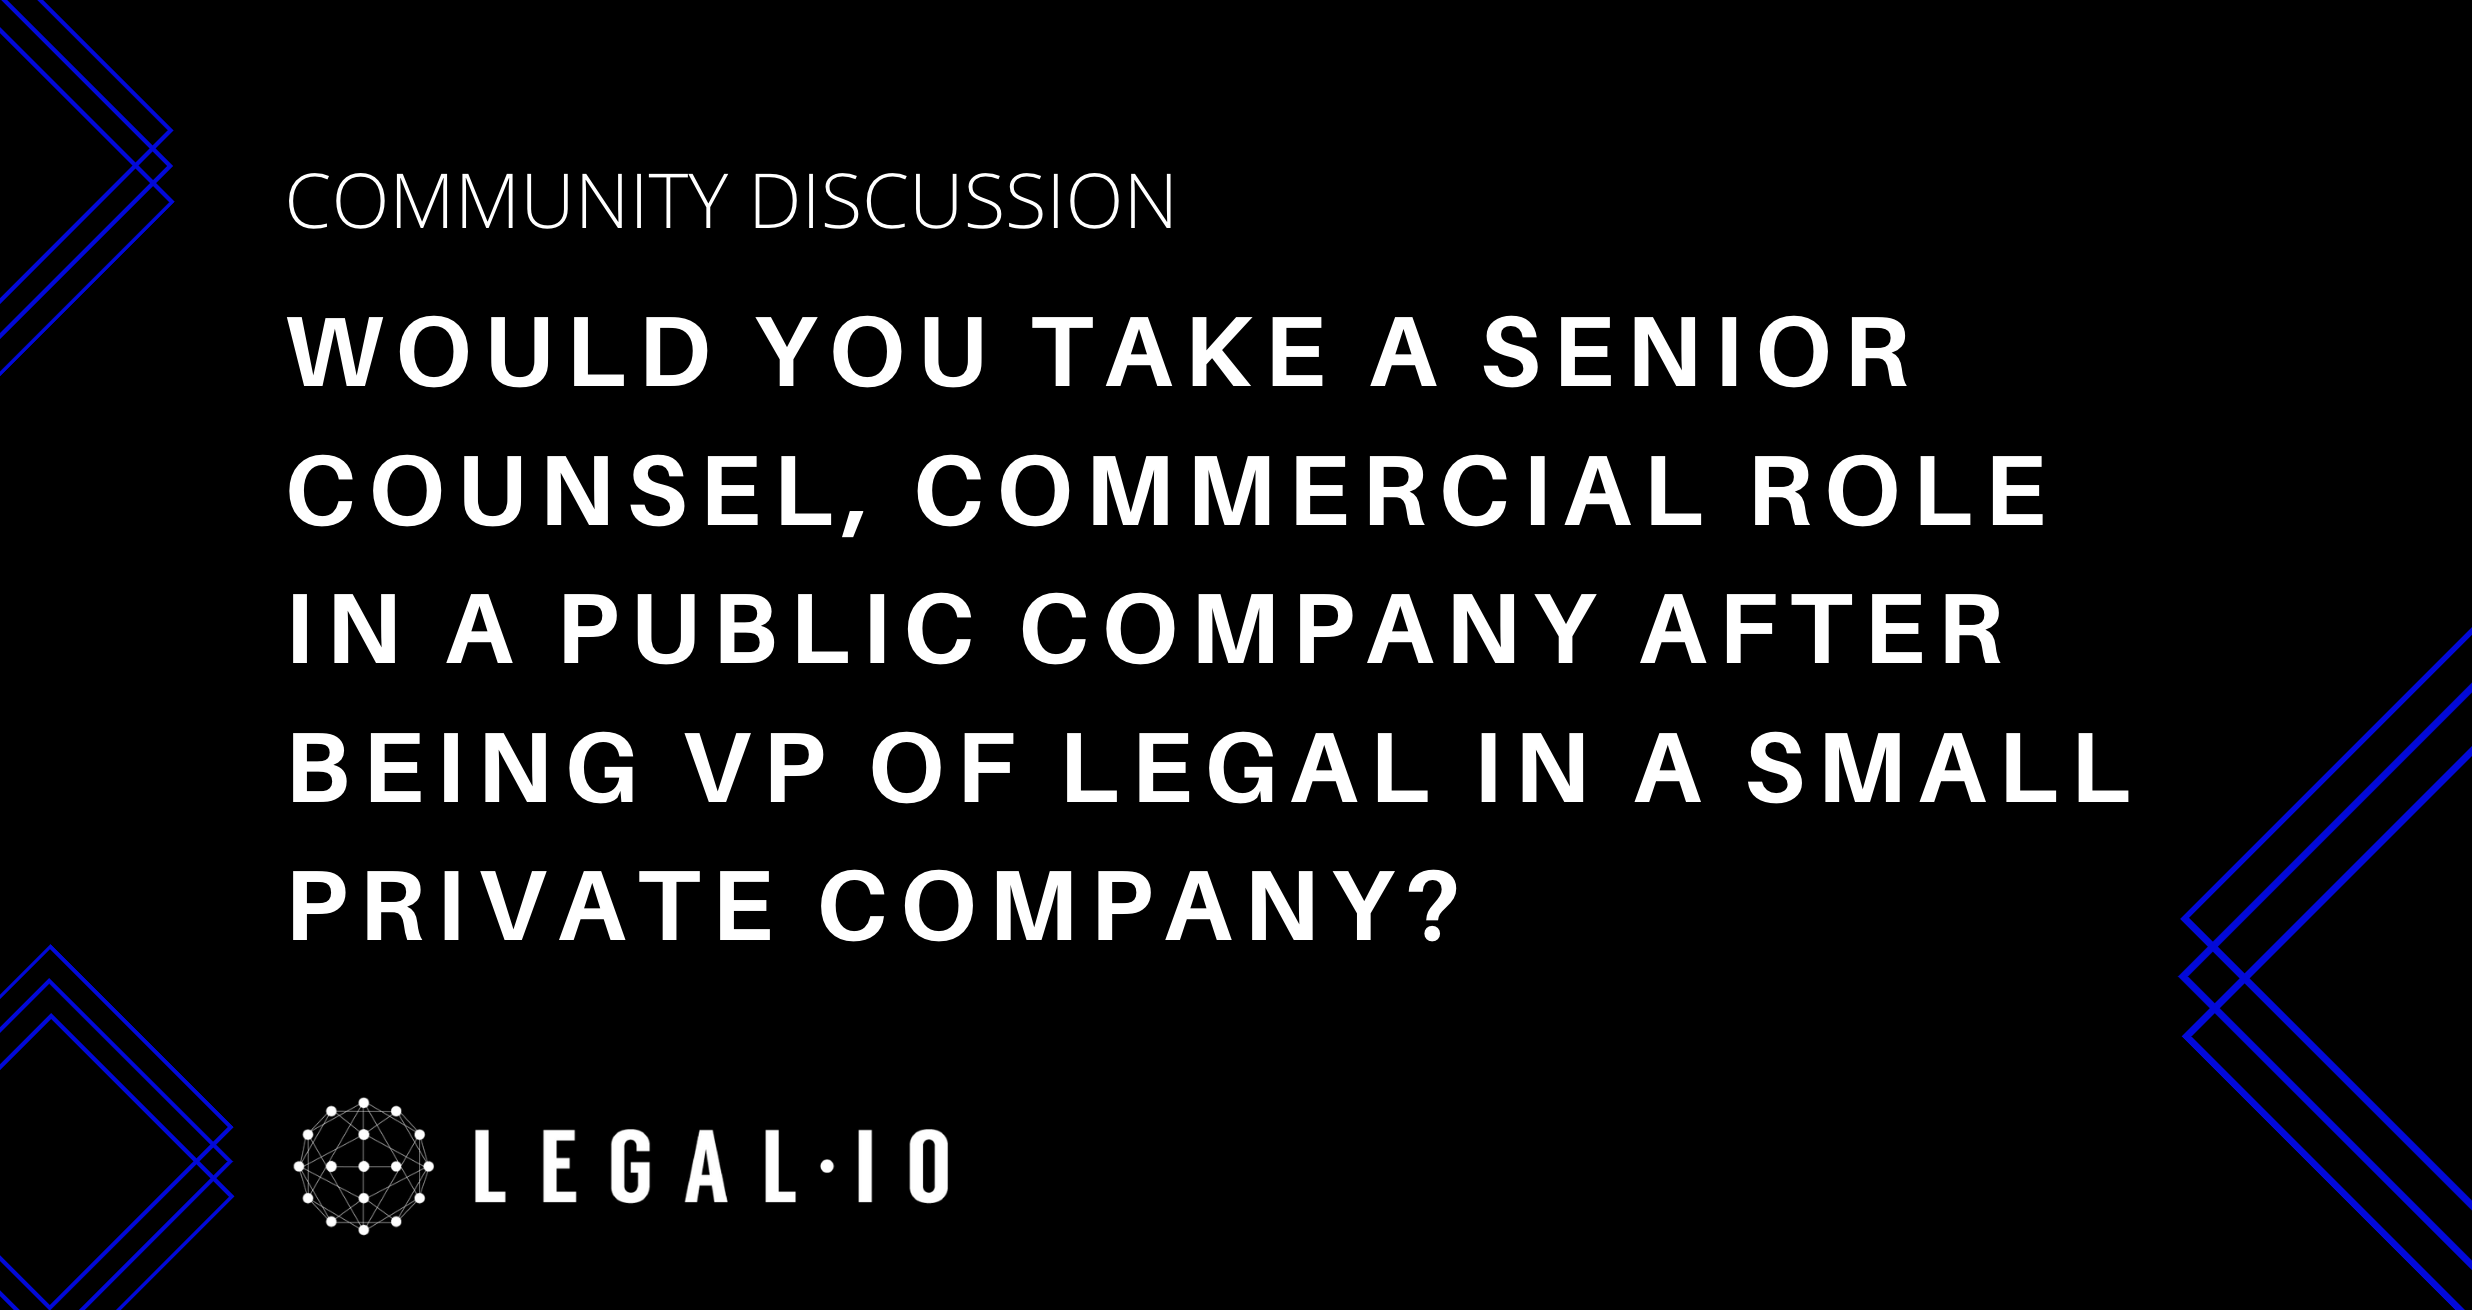 Community Perspectives: Would you take a Senior Counsel, Commercial role in a public company after being VP of Legal in a small private company?